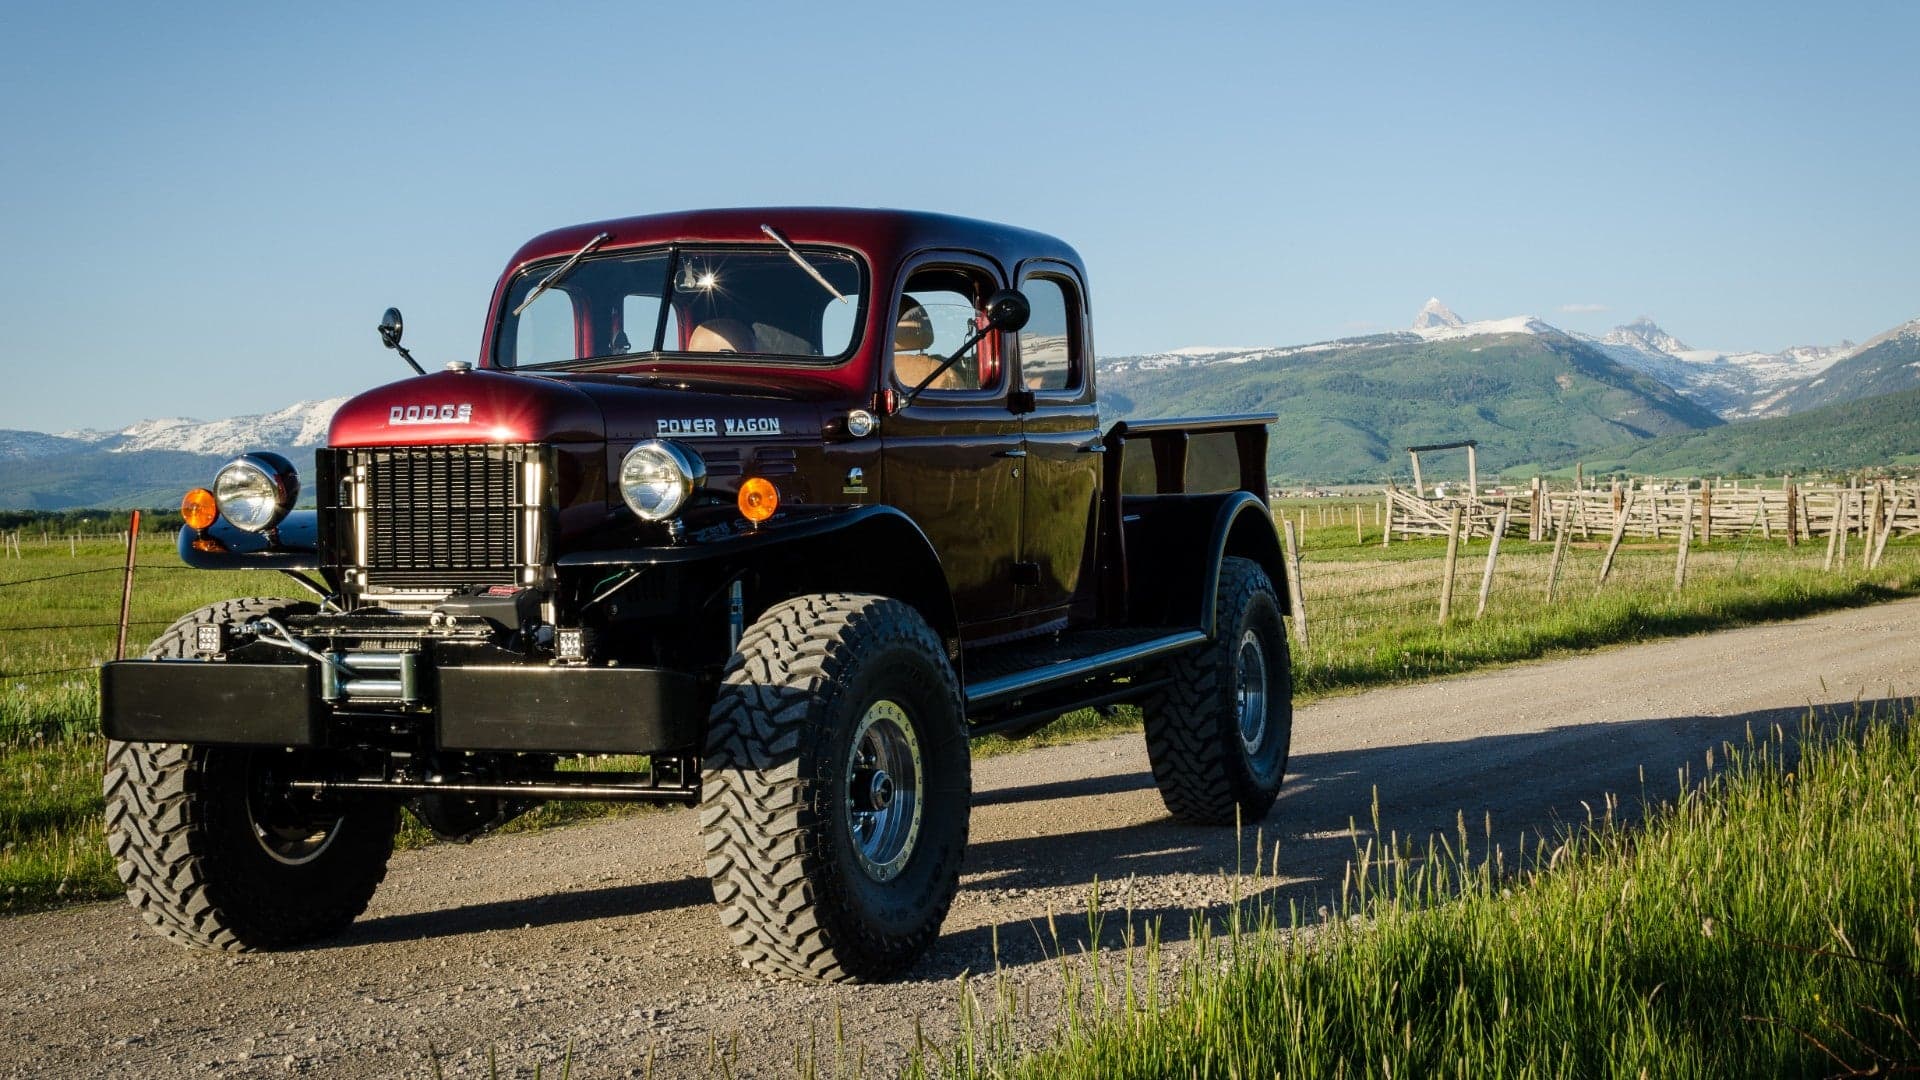 Cummins-Swapped 1949 Dodge Power Wagon Restomod Merges Old Glory With New Tech